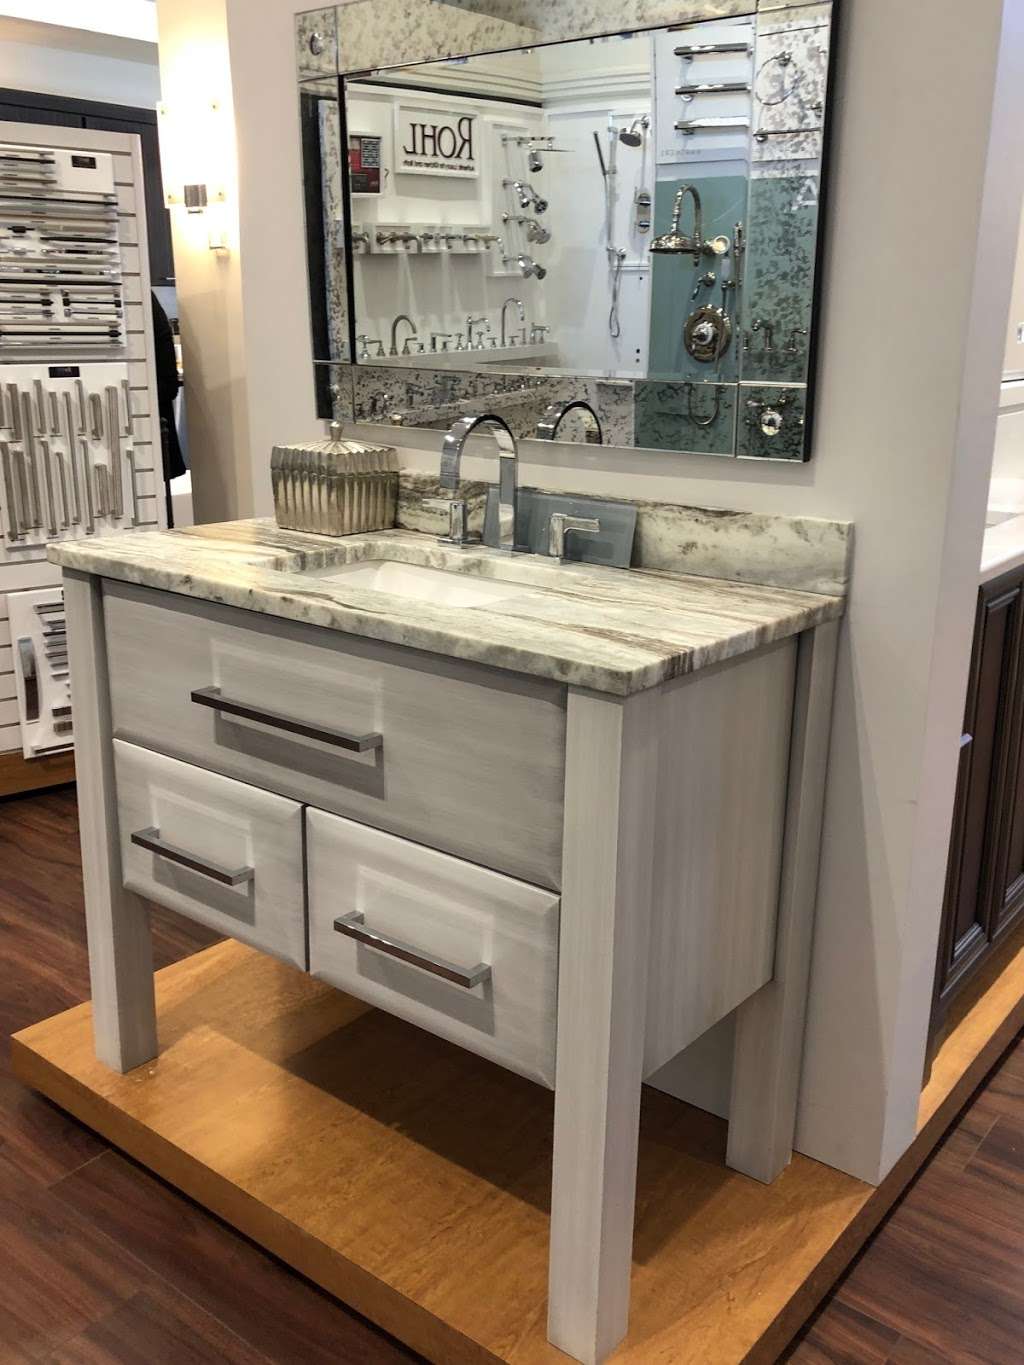 ANEW Kitchen and Bath North Plainfield NJ | 993-995 Route 22 west, North Plainfield, NJ 07060, USA | Phone: (908) 753-8181